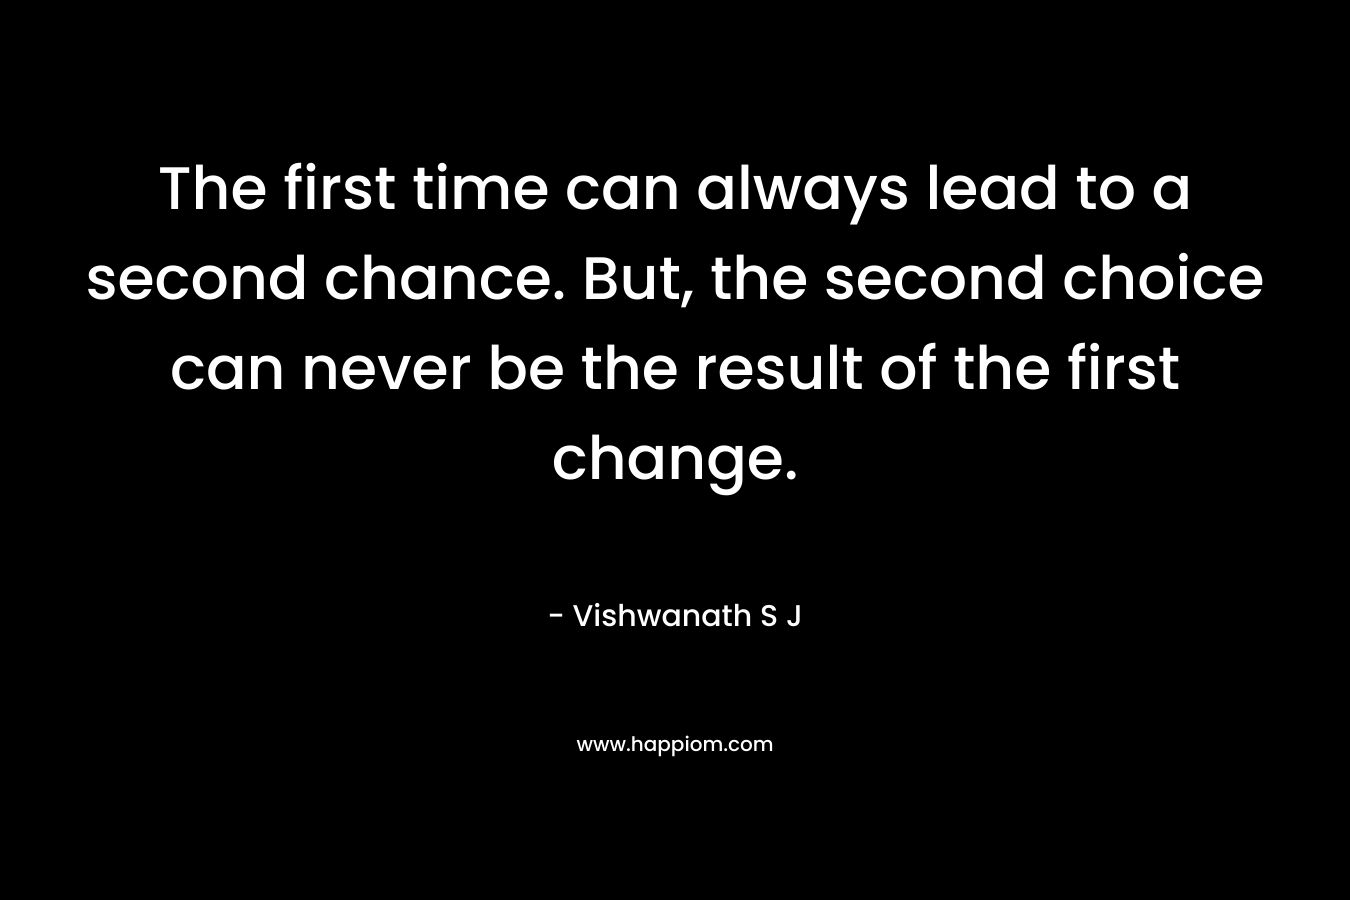 The first time can always lead to a second chance. But, the second choice can never be the result of the first change.